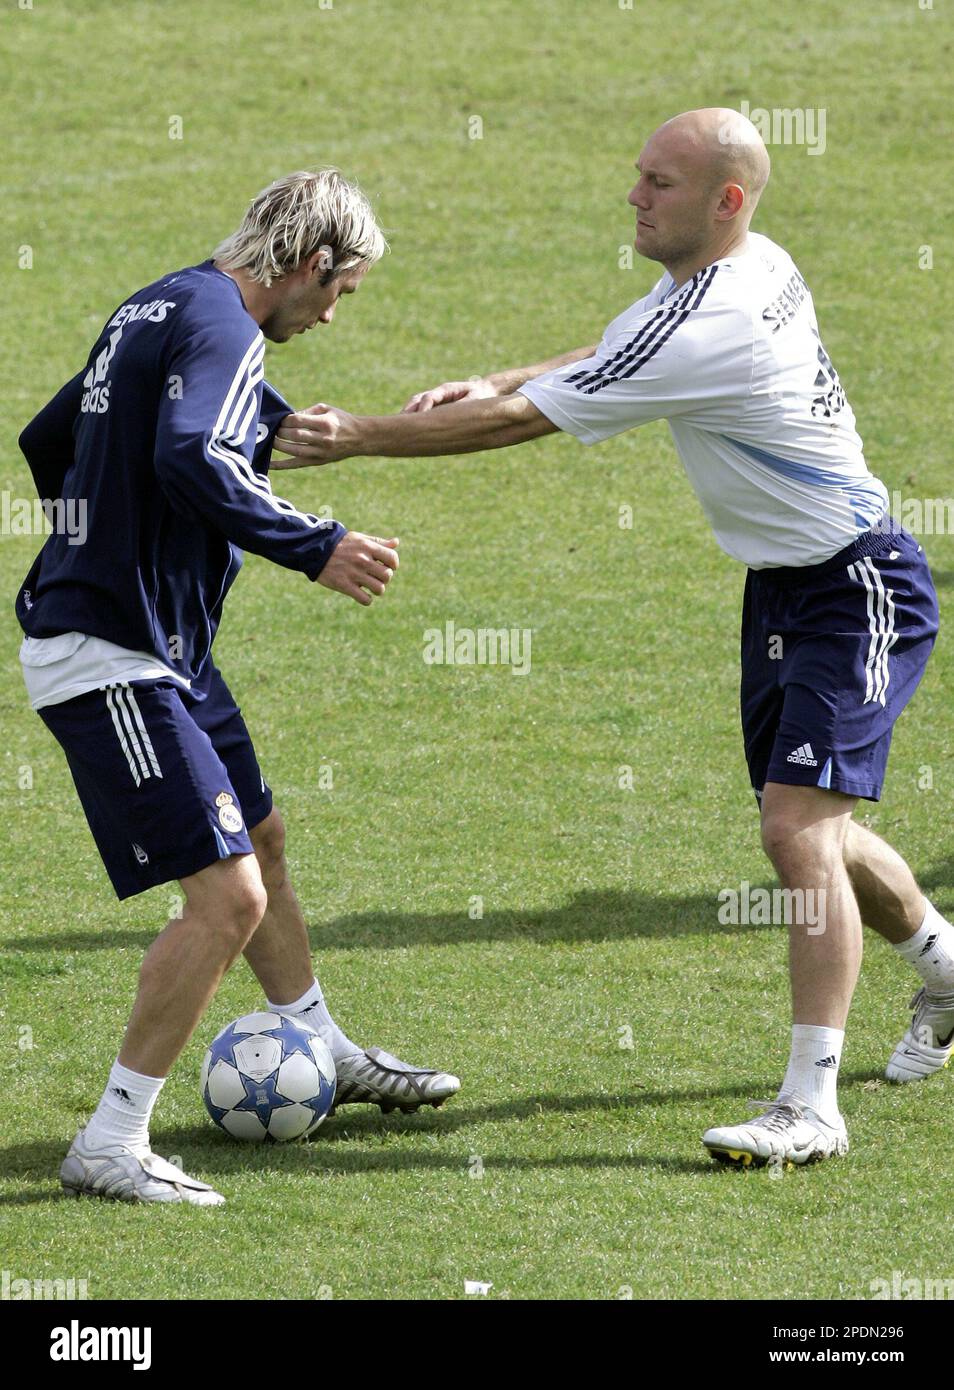 England's Real Madrid player David Beckham, left, duels for the ball with  his teammate Thomas Gravesen from Denmark during their training at the Las  Rozas training complex on the outskirts of Madrid,